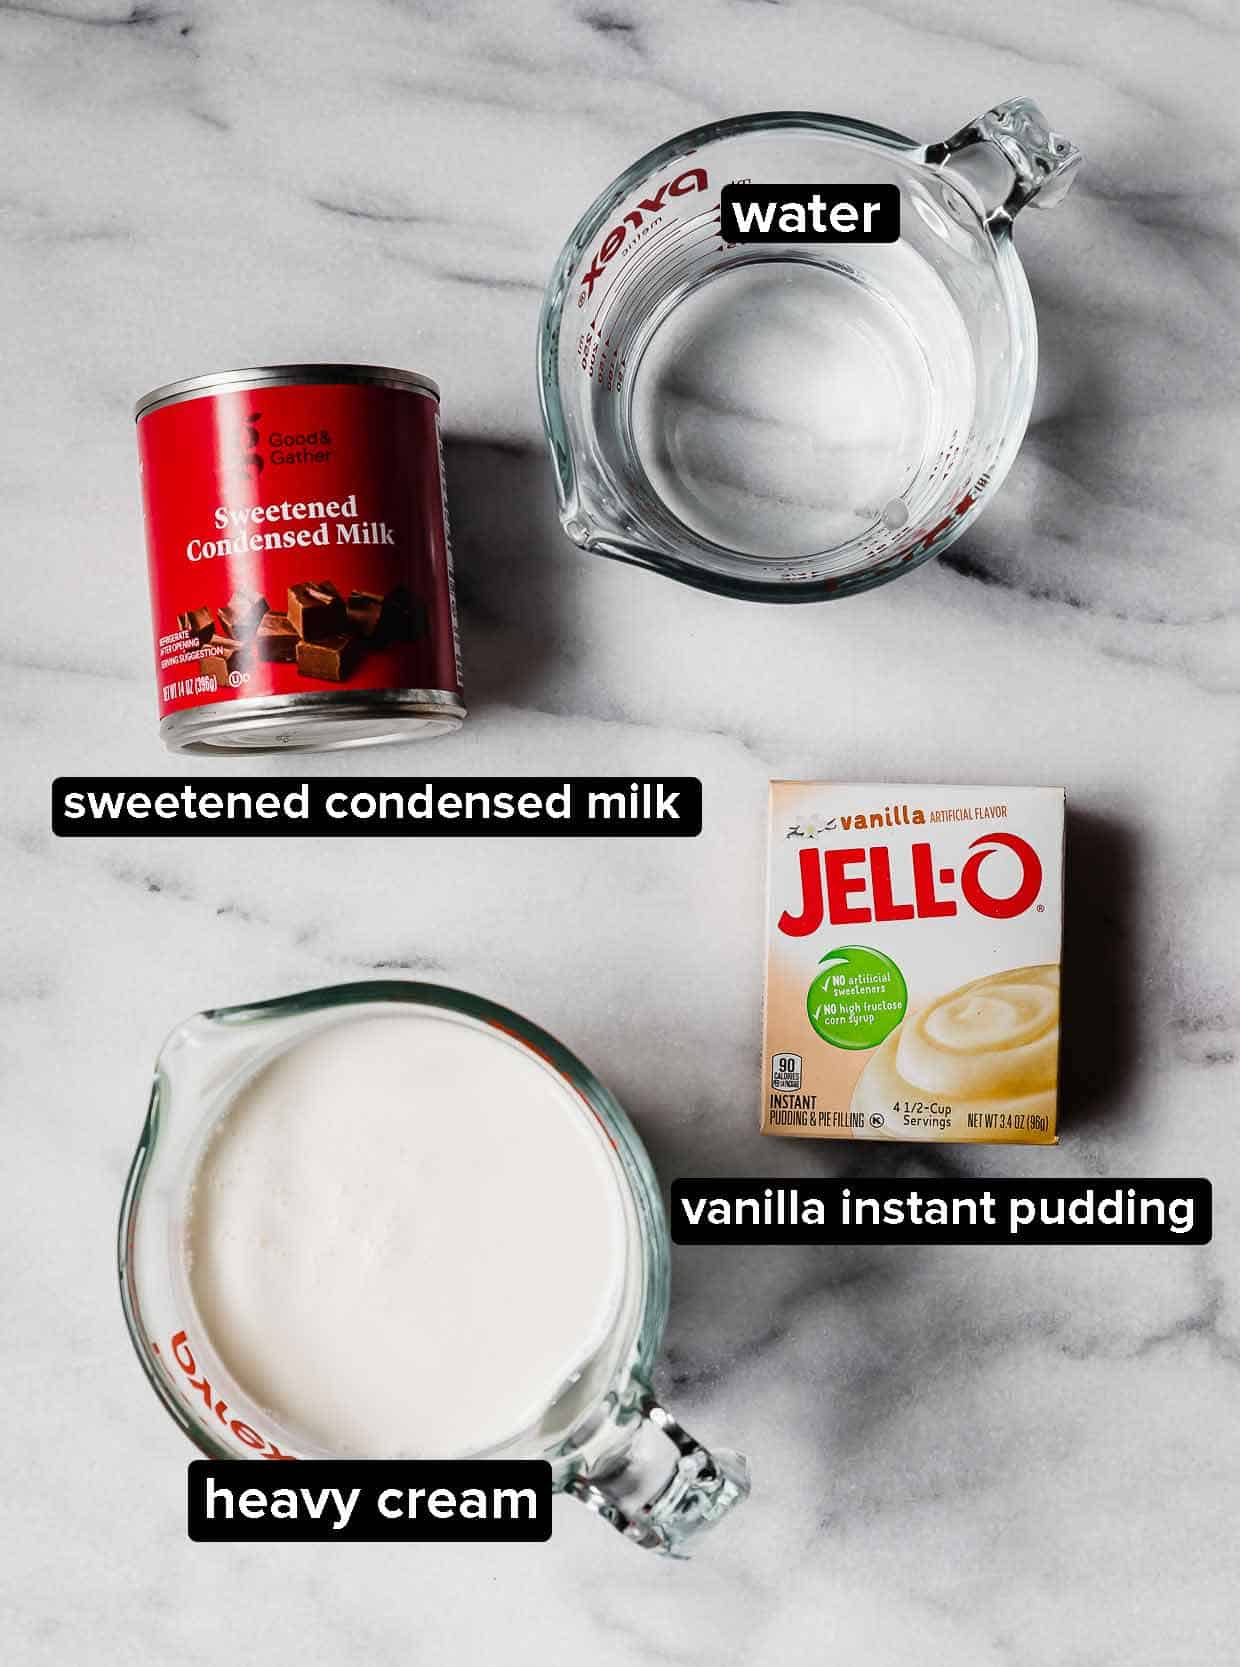 Sweetened condensed milk, heavy cream, water, and vanilla pudding on a marble background.